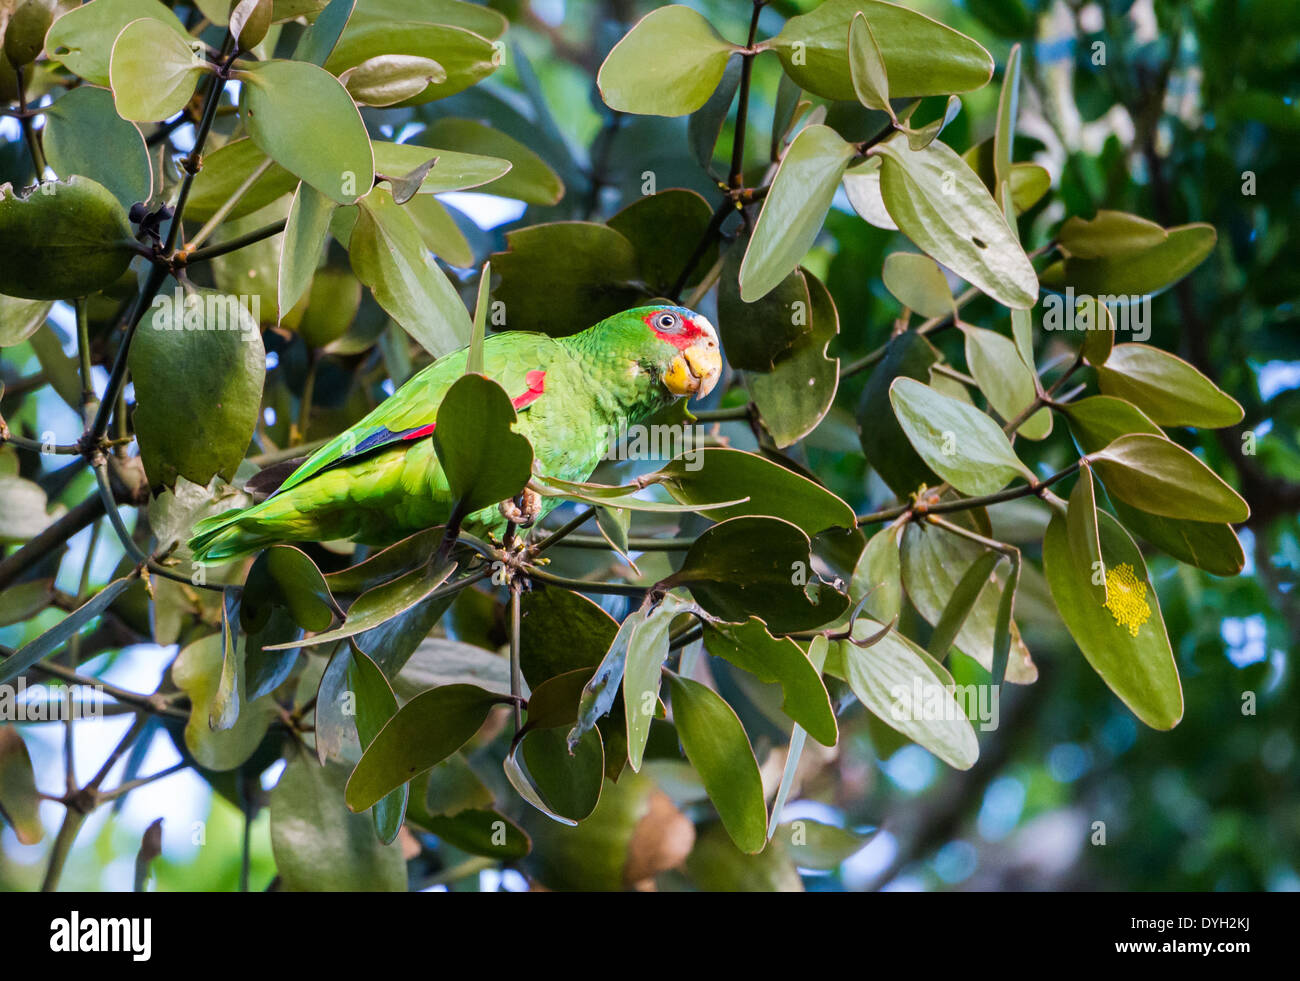 A White-fronted Parrot (Amazona albifrons) on a tree. Monteverde, Costa Rica. Stock Photo